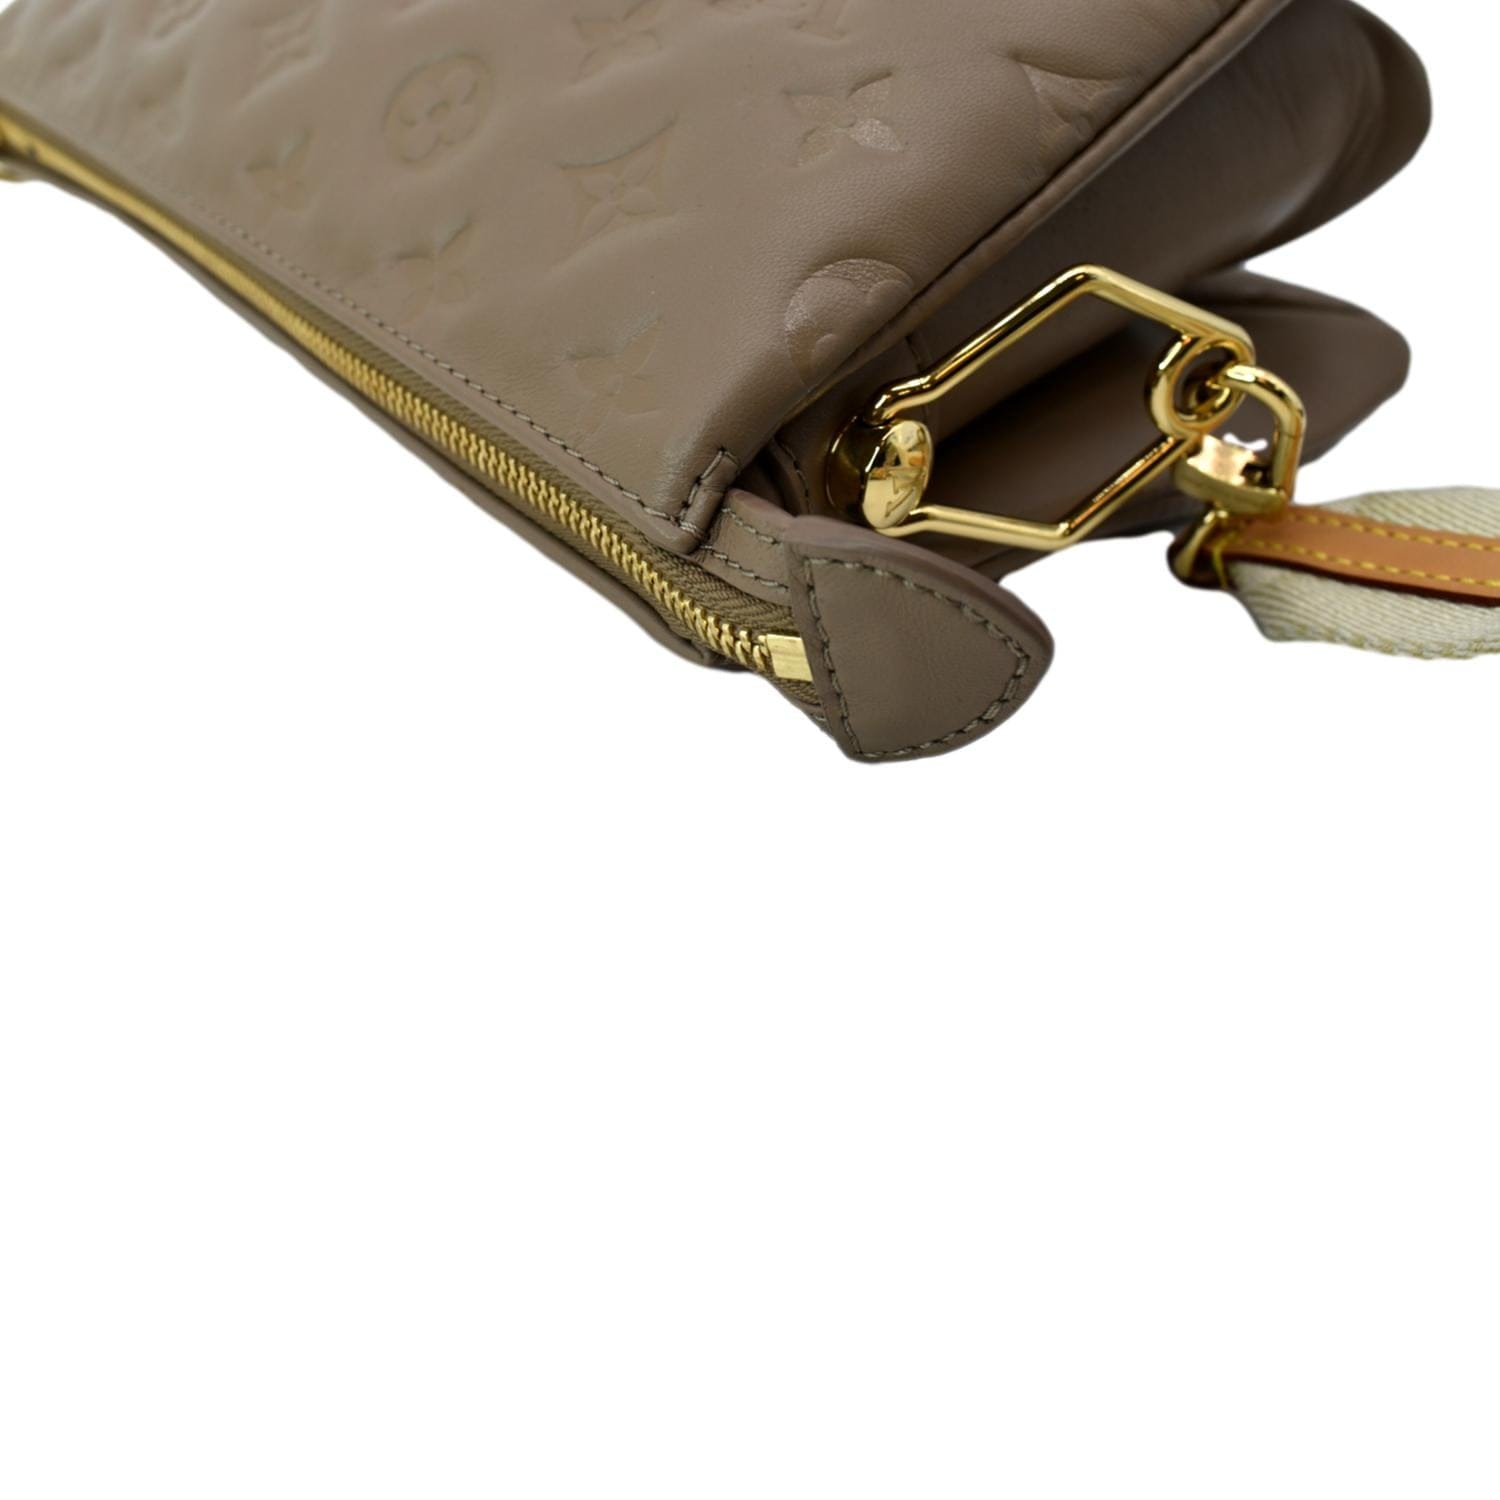 Louis Vuitton Taupe Coussin PM